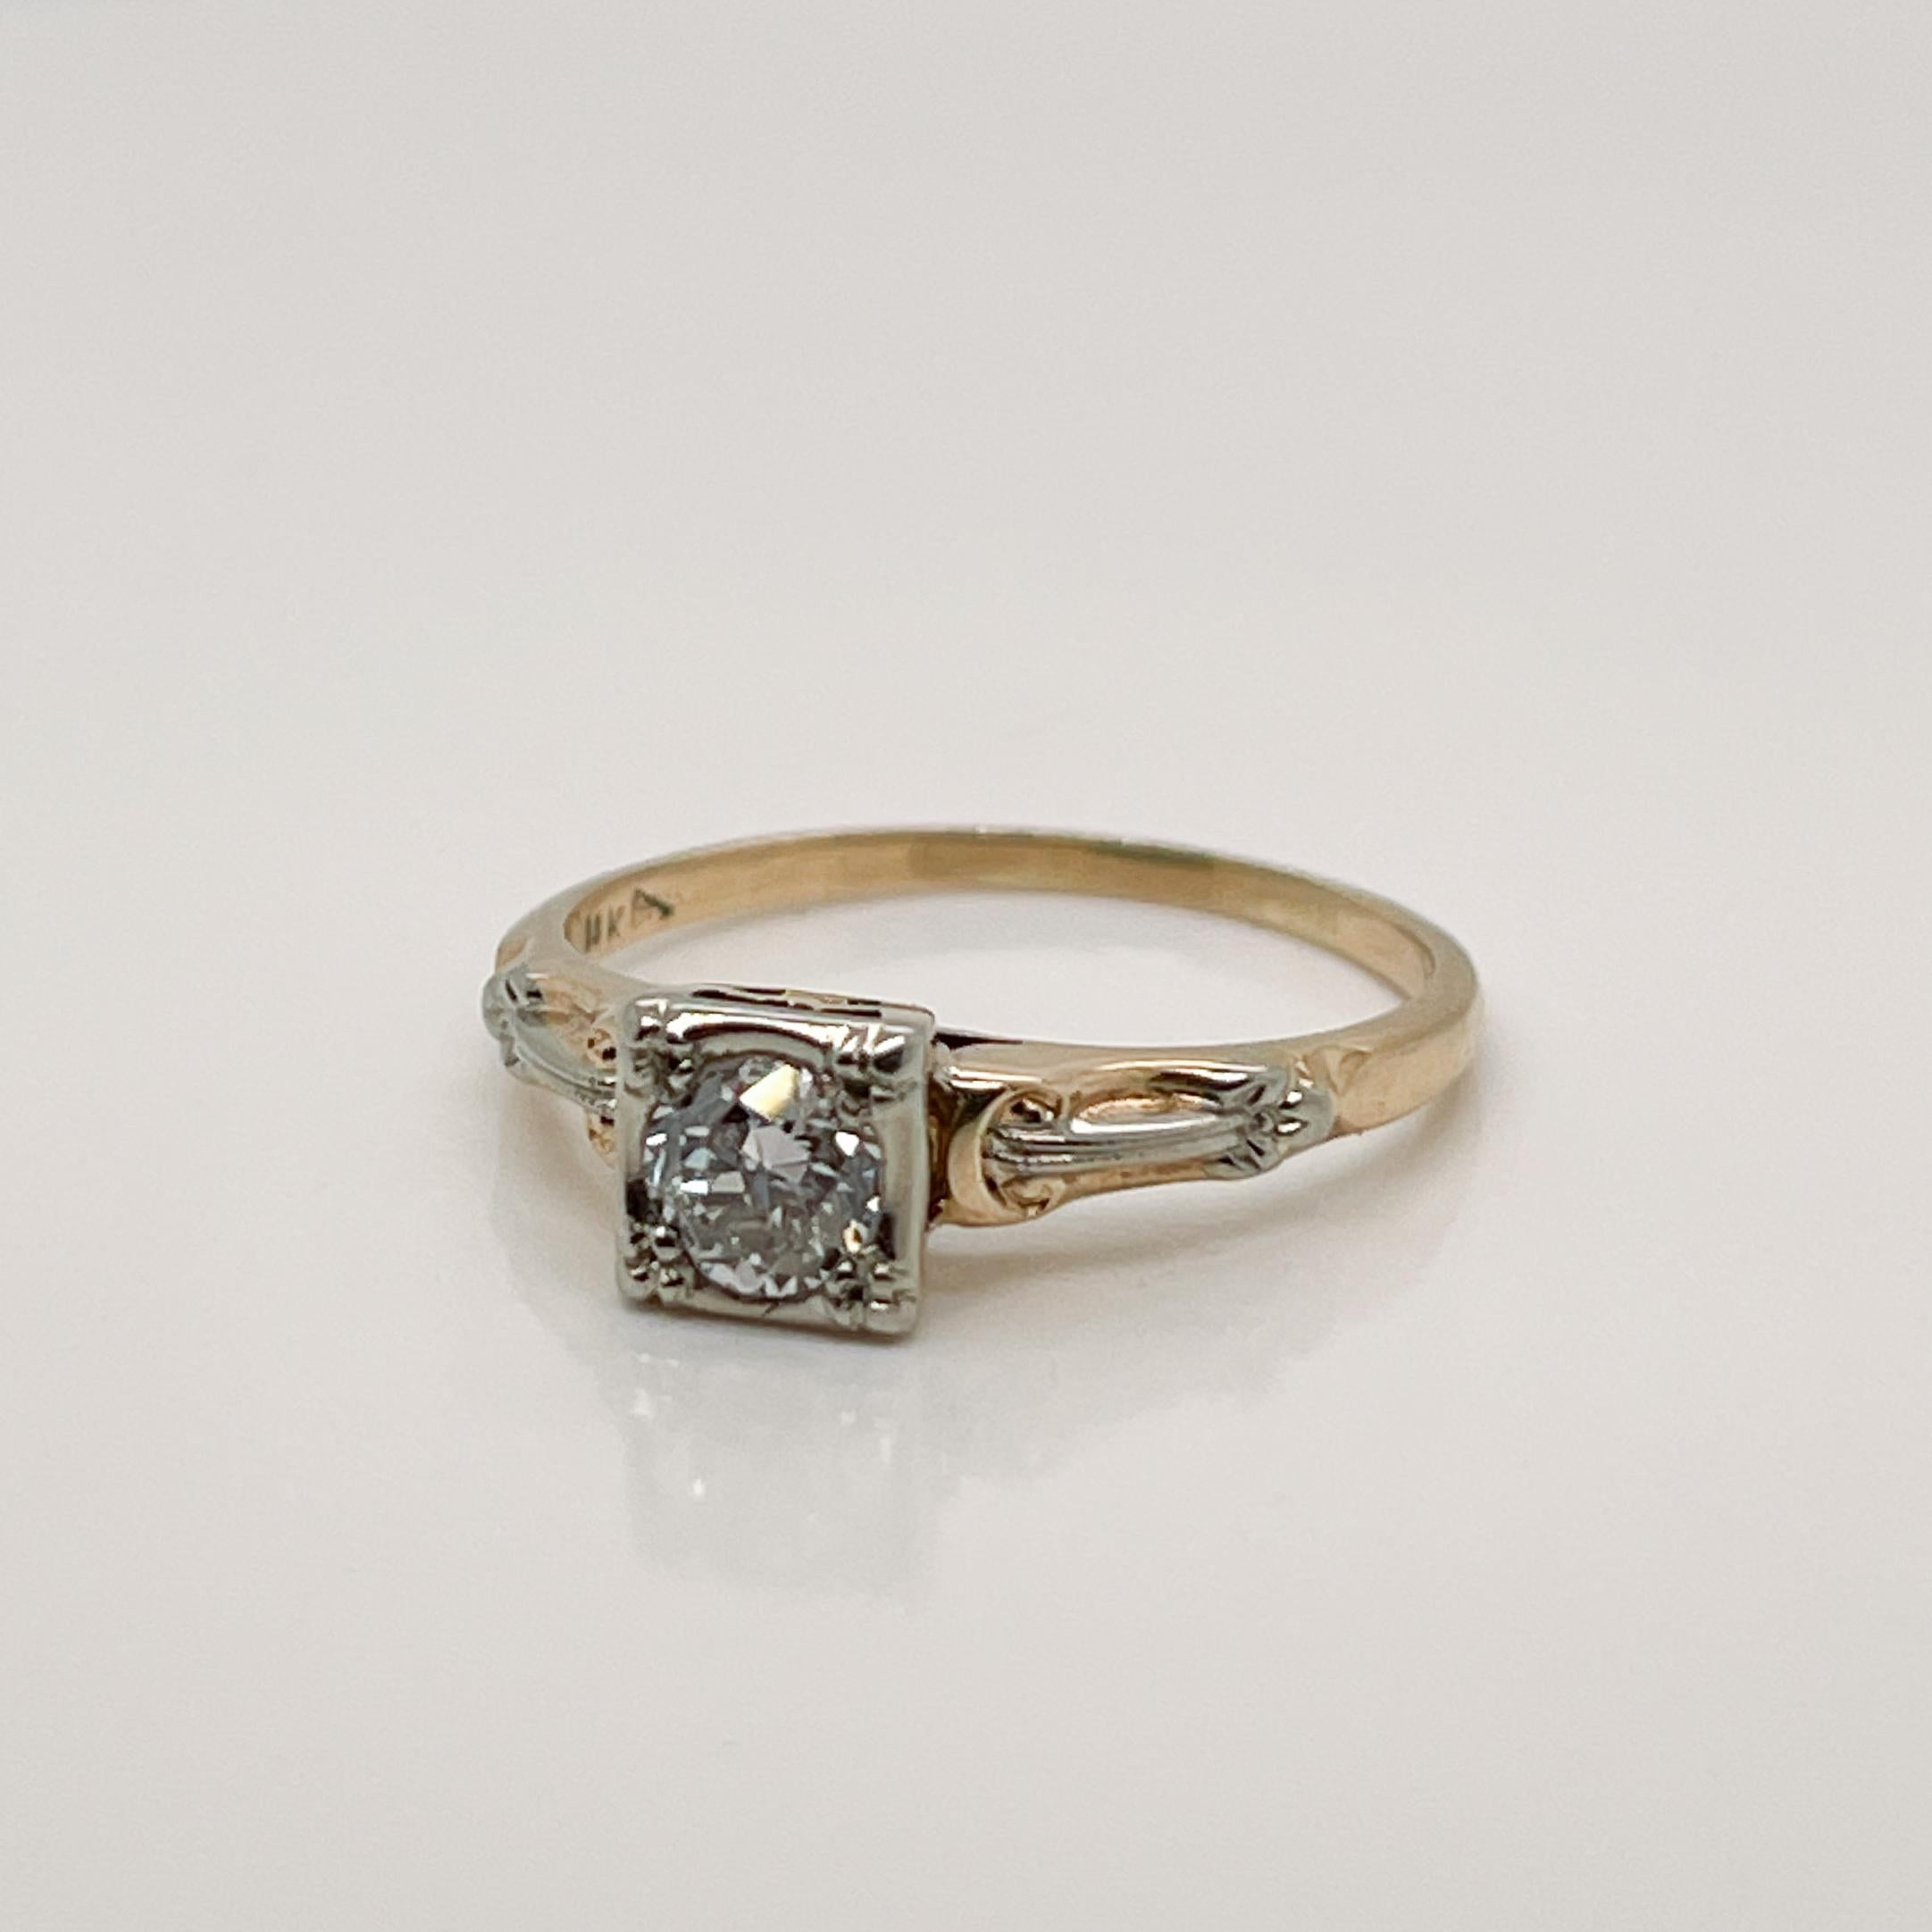 A very fine antique Edwardian 14 Karat gold and diamond engagement ring.

With a round brilliant cut diamond pave set in square setting. 

Embellished with platinum topped or white gold accent on the shoulder. 

Simply a terrific ring with a pretty